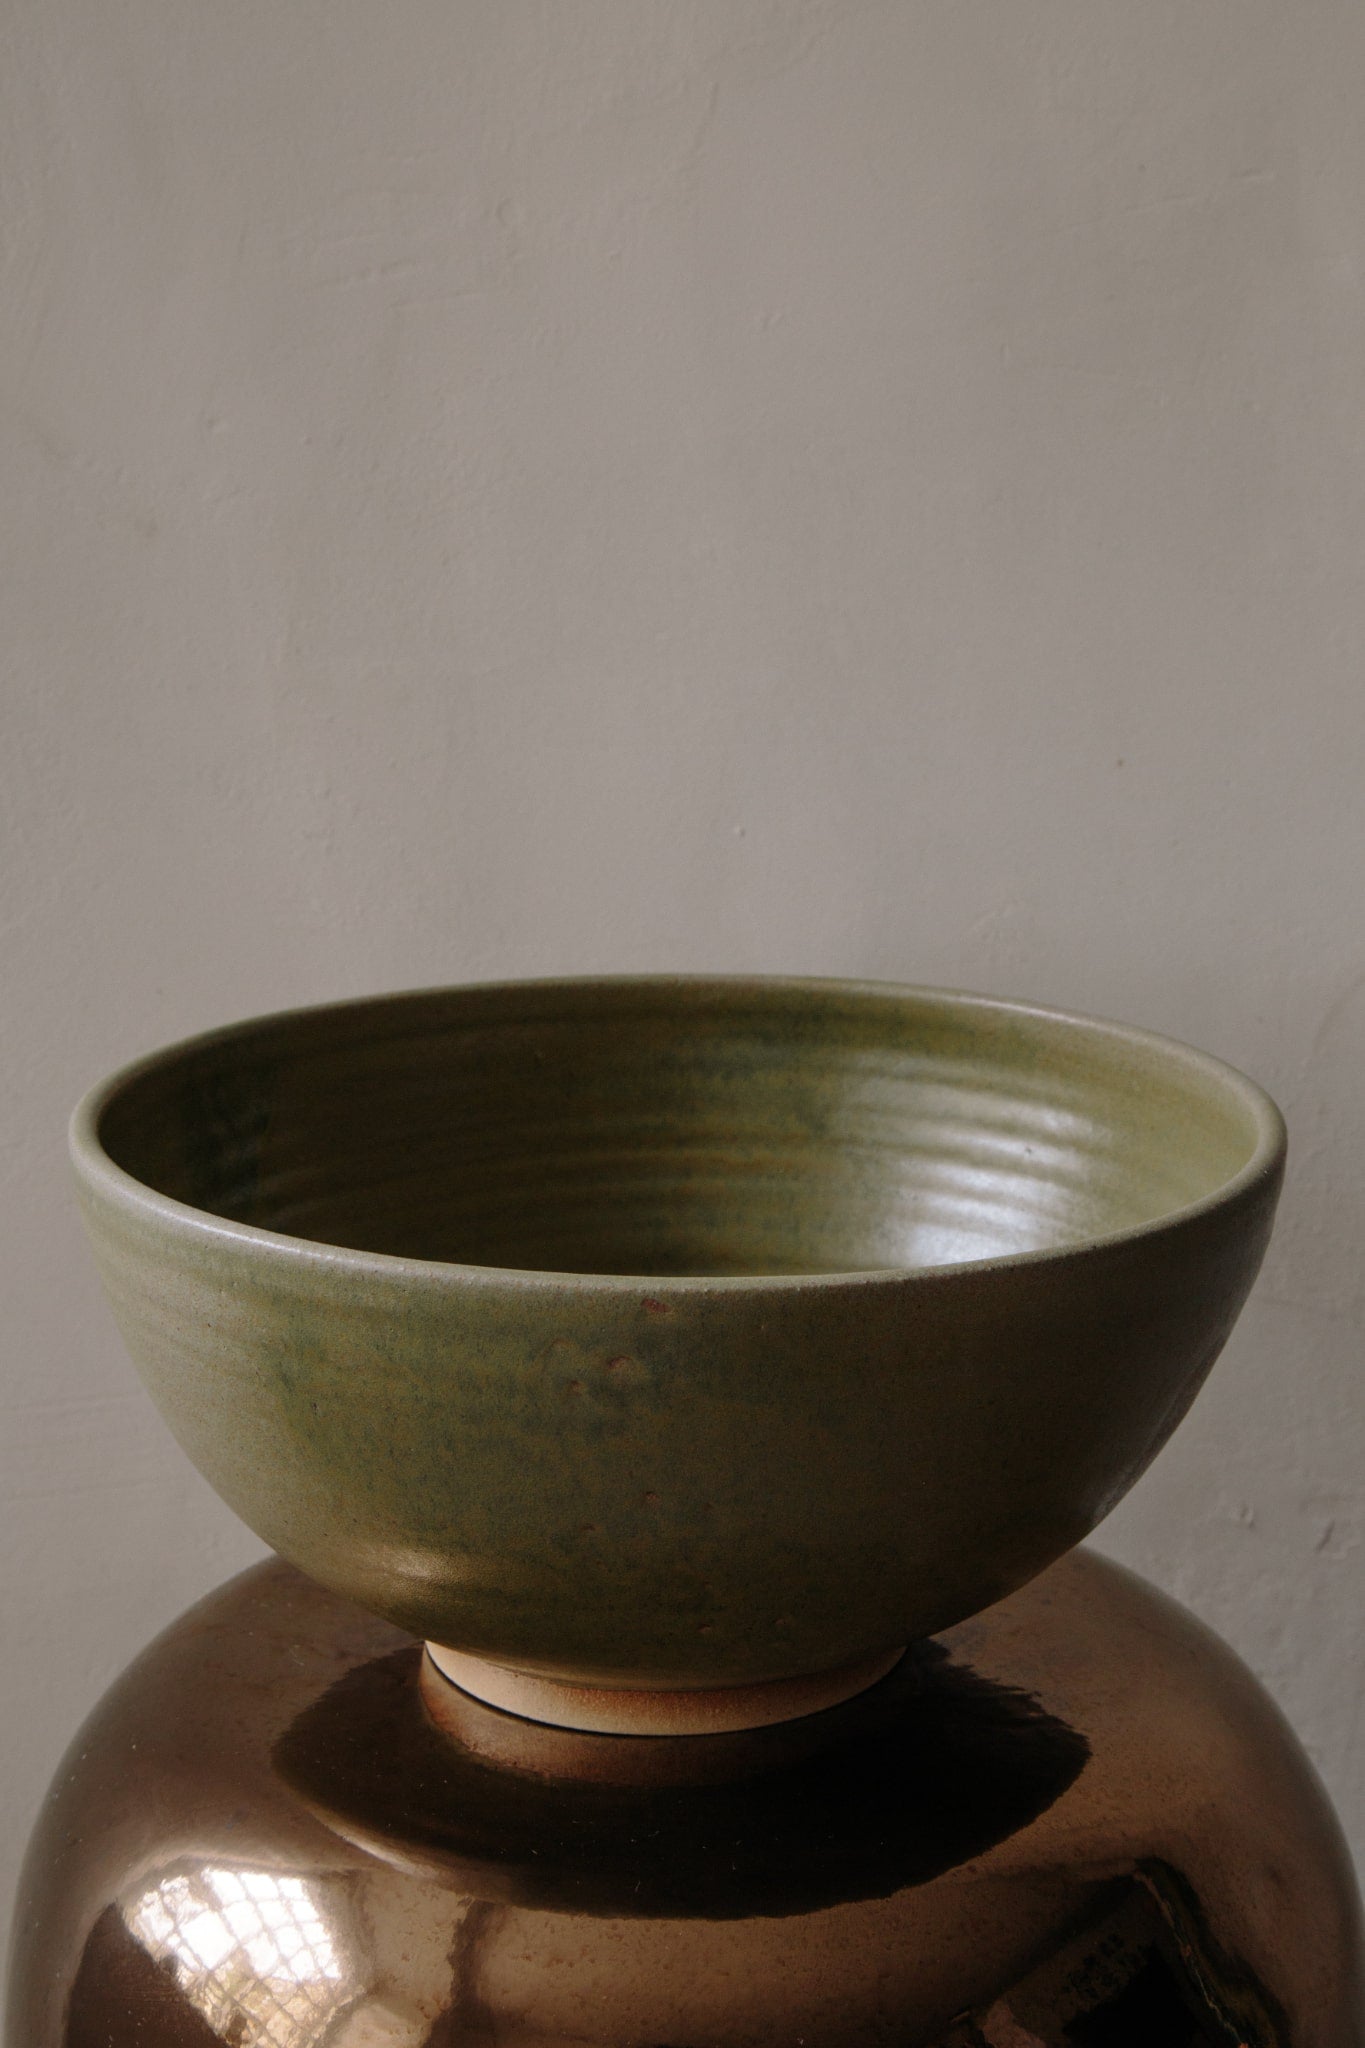 Large olive green ceramic bowl placed on a metallic copper stool photographed in natural light coming in from the left.